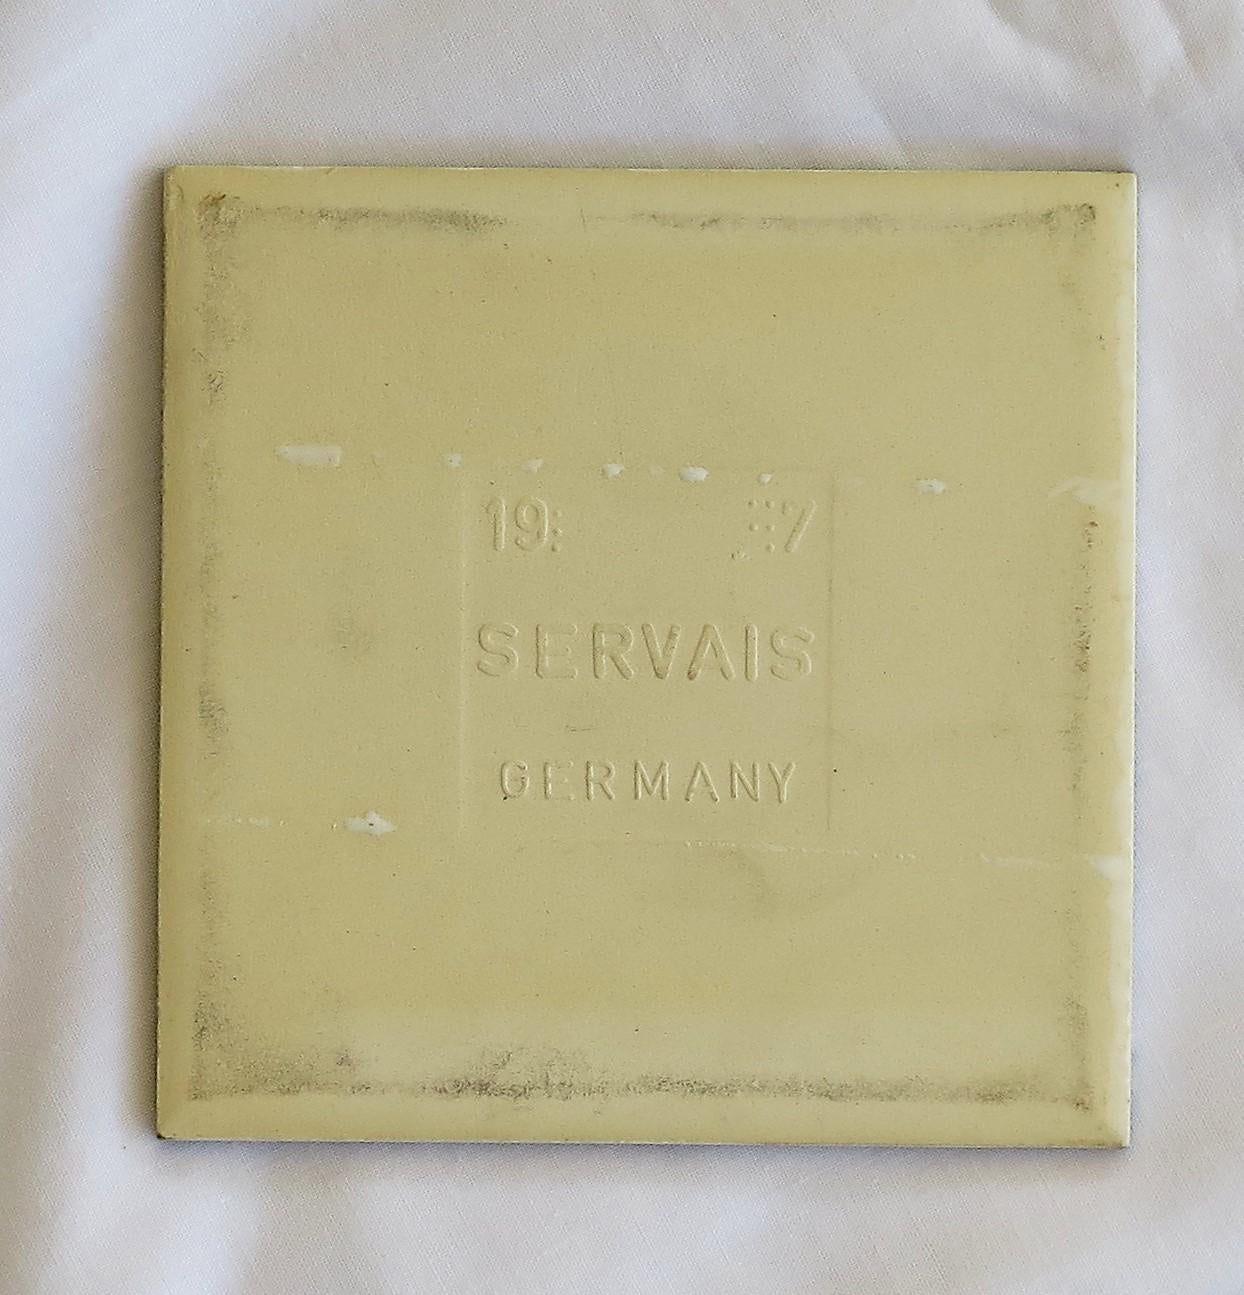 Set of Eleven Ceramic Wall Tiles Square by Servais of Germany Set 4, circa 1950 13